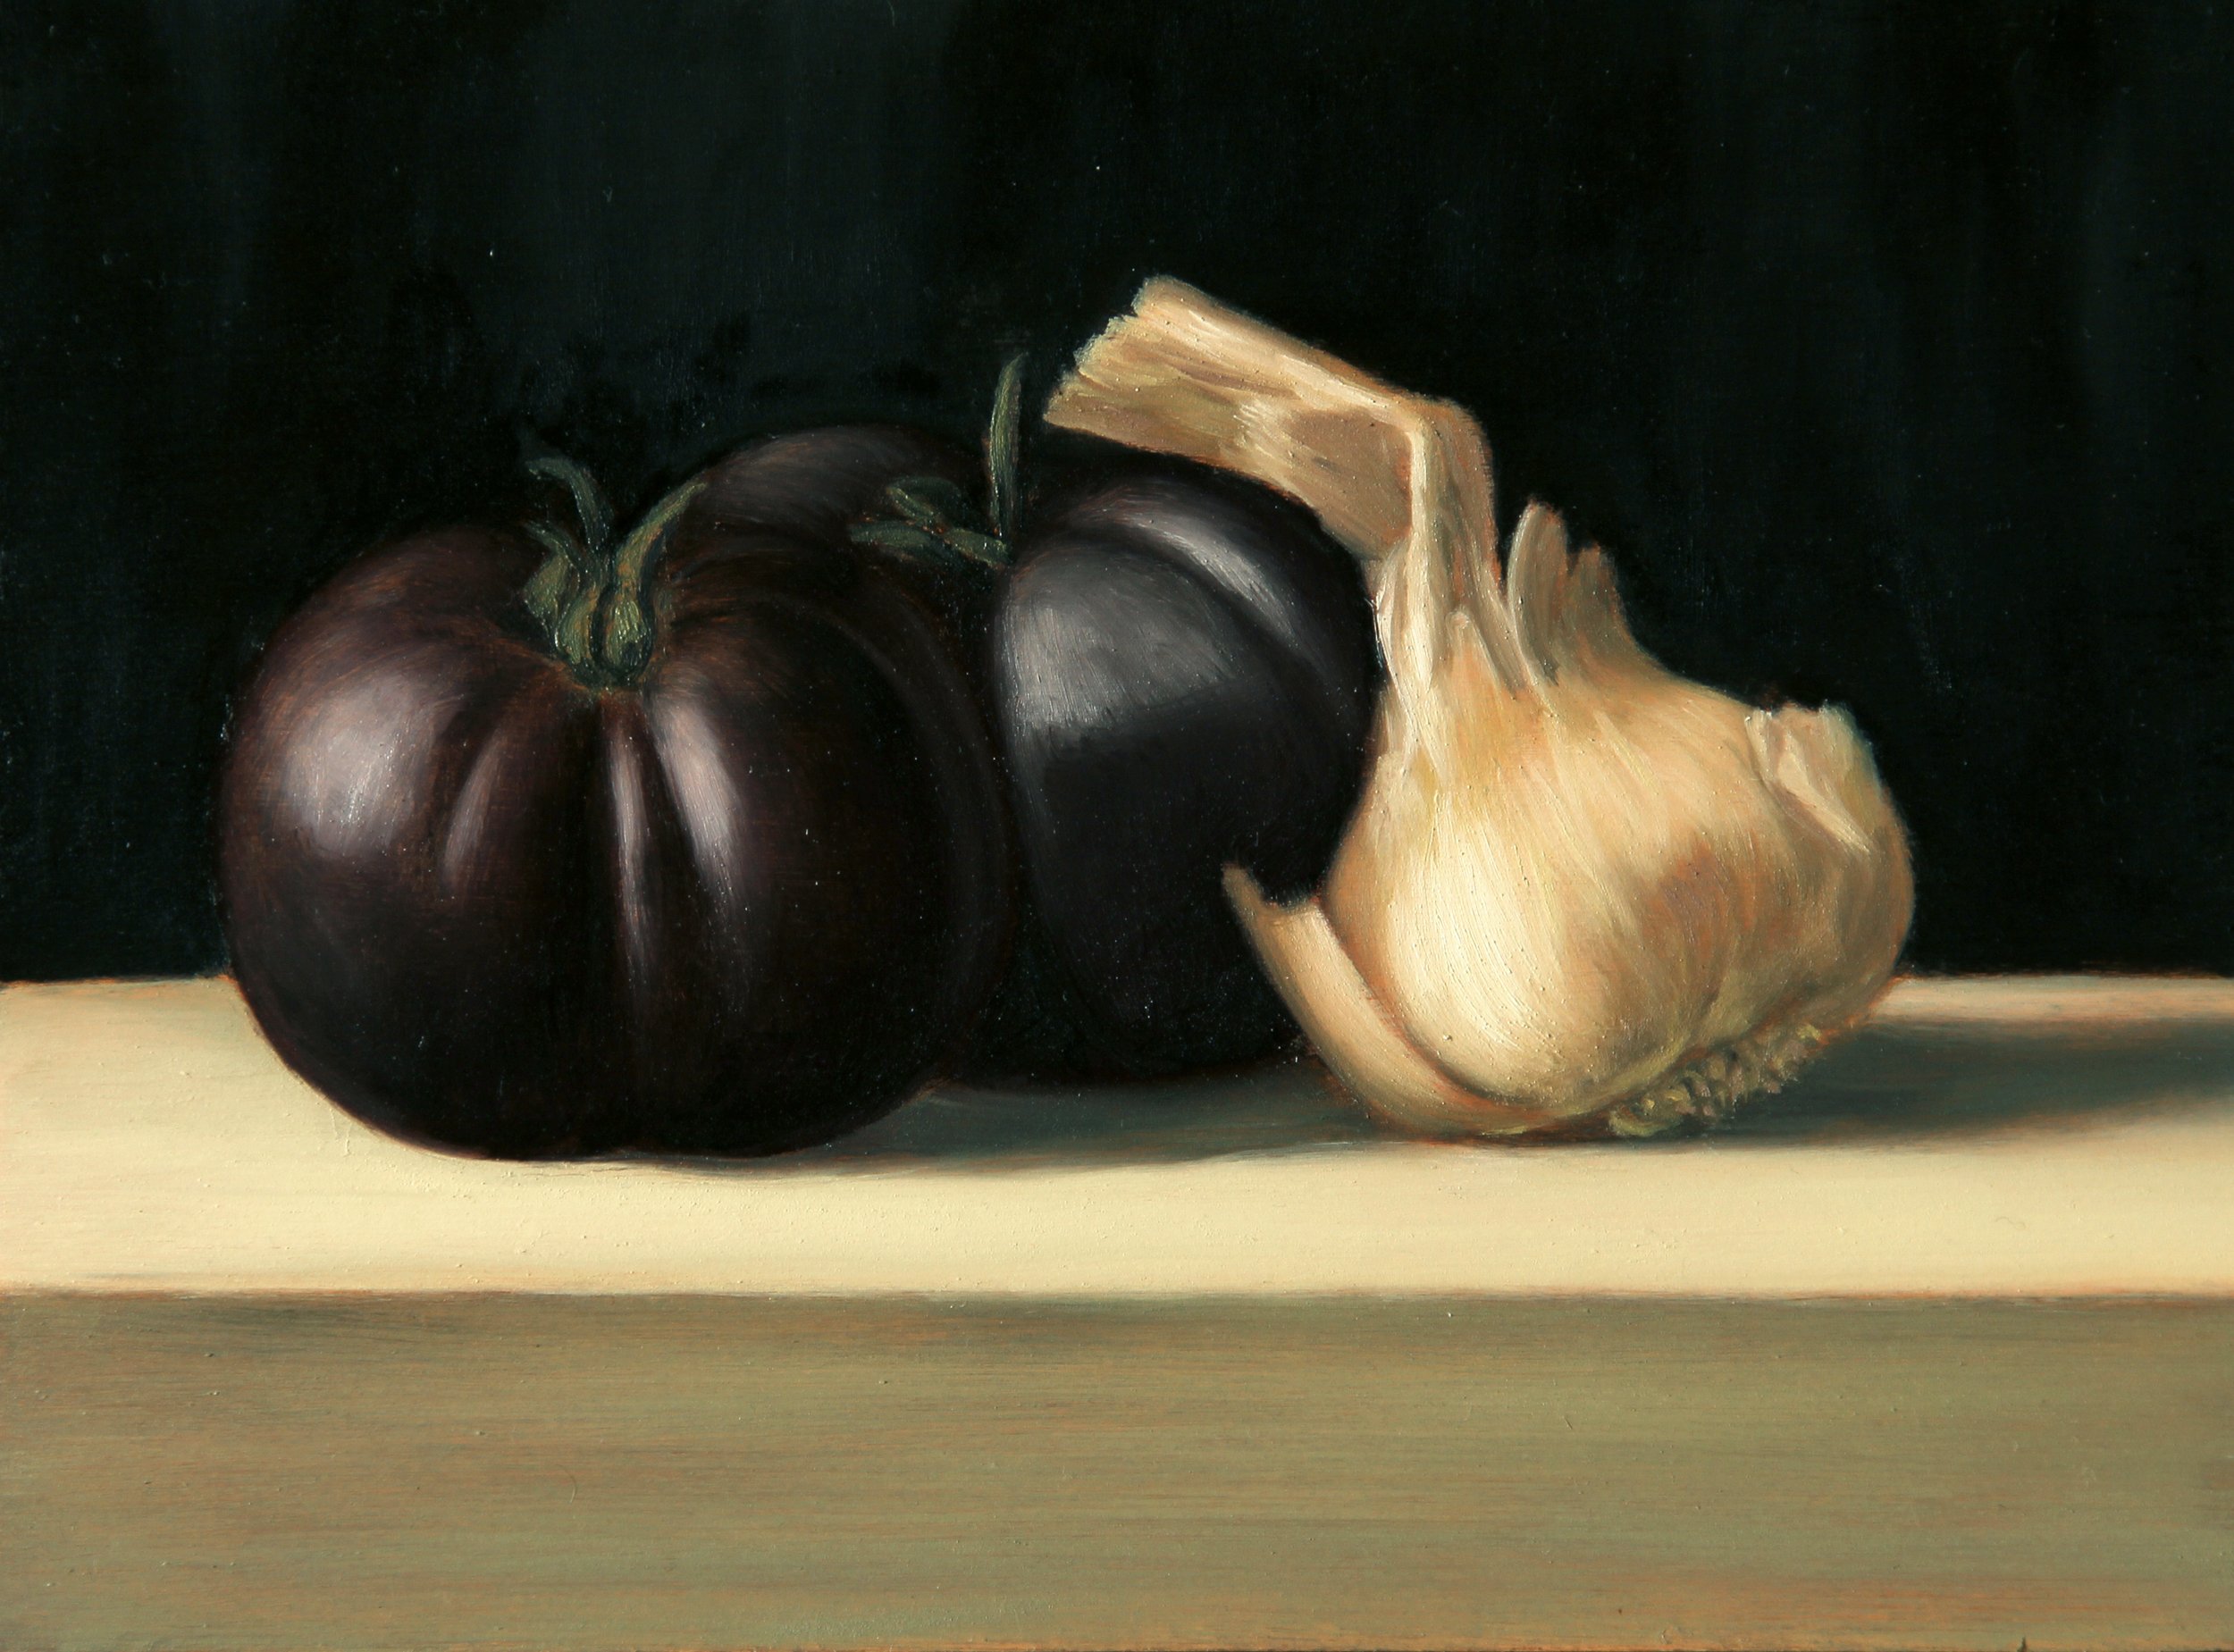 Garlic and Tomatoes, 2022. Oil on panel. 7 x 9 1/2".